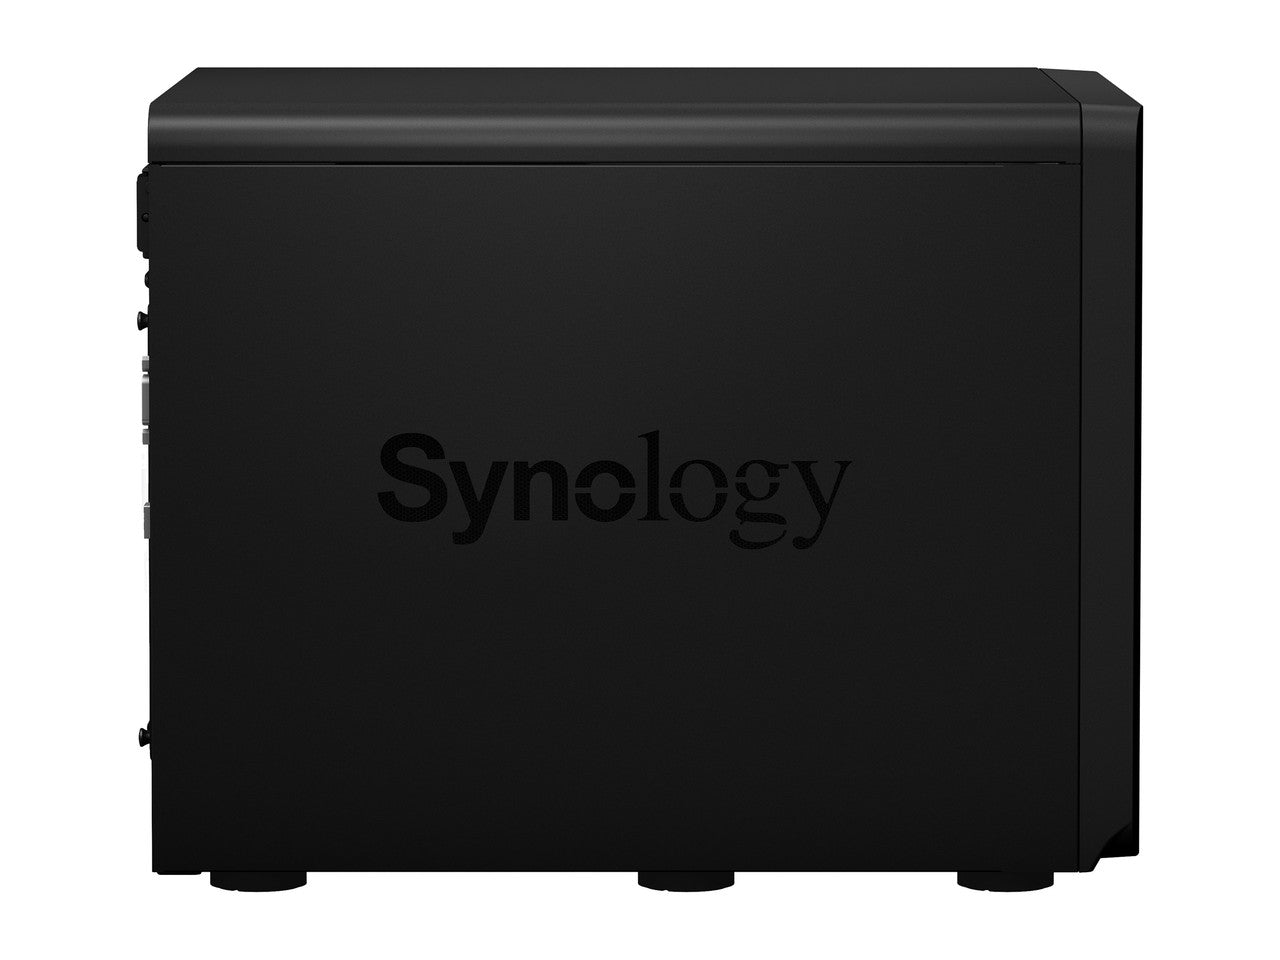 Synology DS2422+ Quad Core 2.2Ghz 12-Bay NAS with E10M20 10GbE Port and 1.6TB (2x800GB) CACHE, 32GB RAM and 96TB (12 x 8TB) of Synology Enterprise Drives